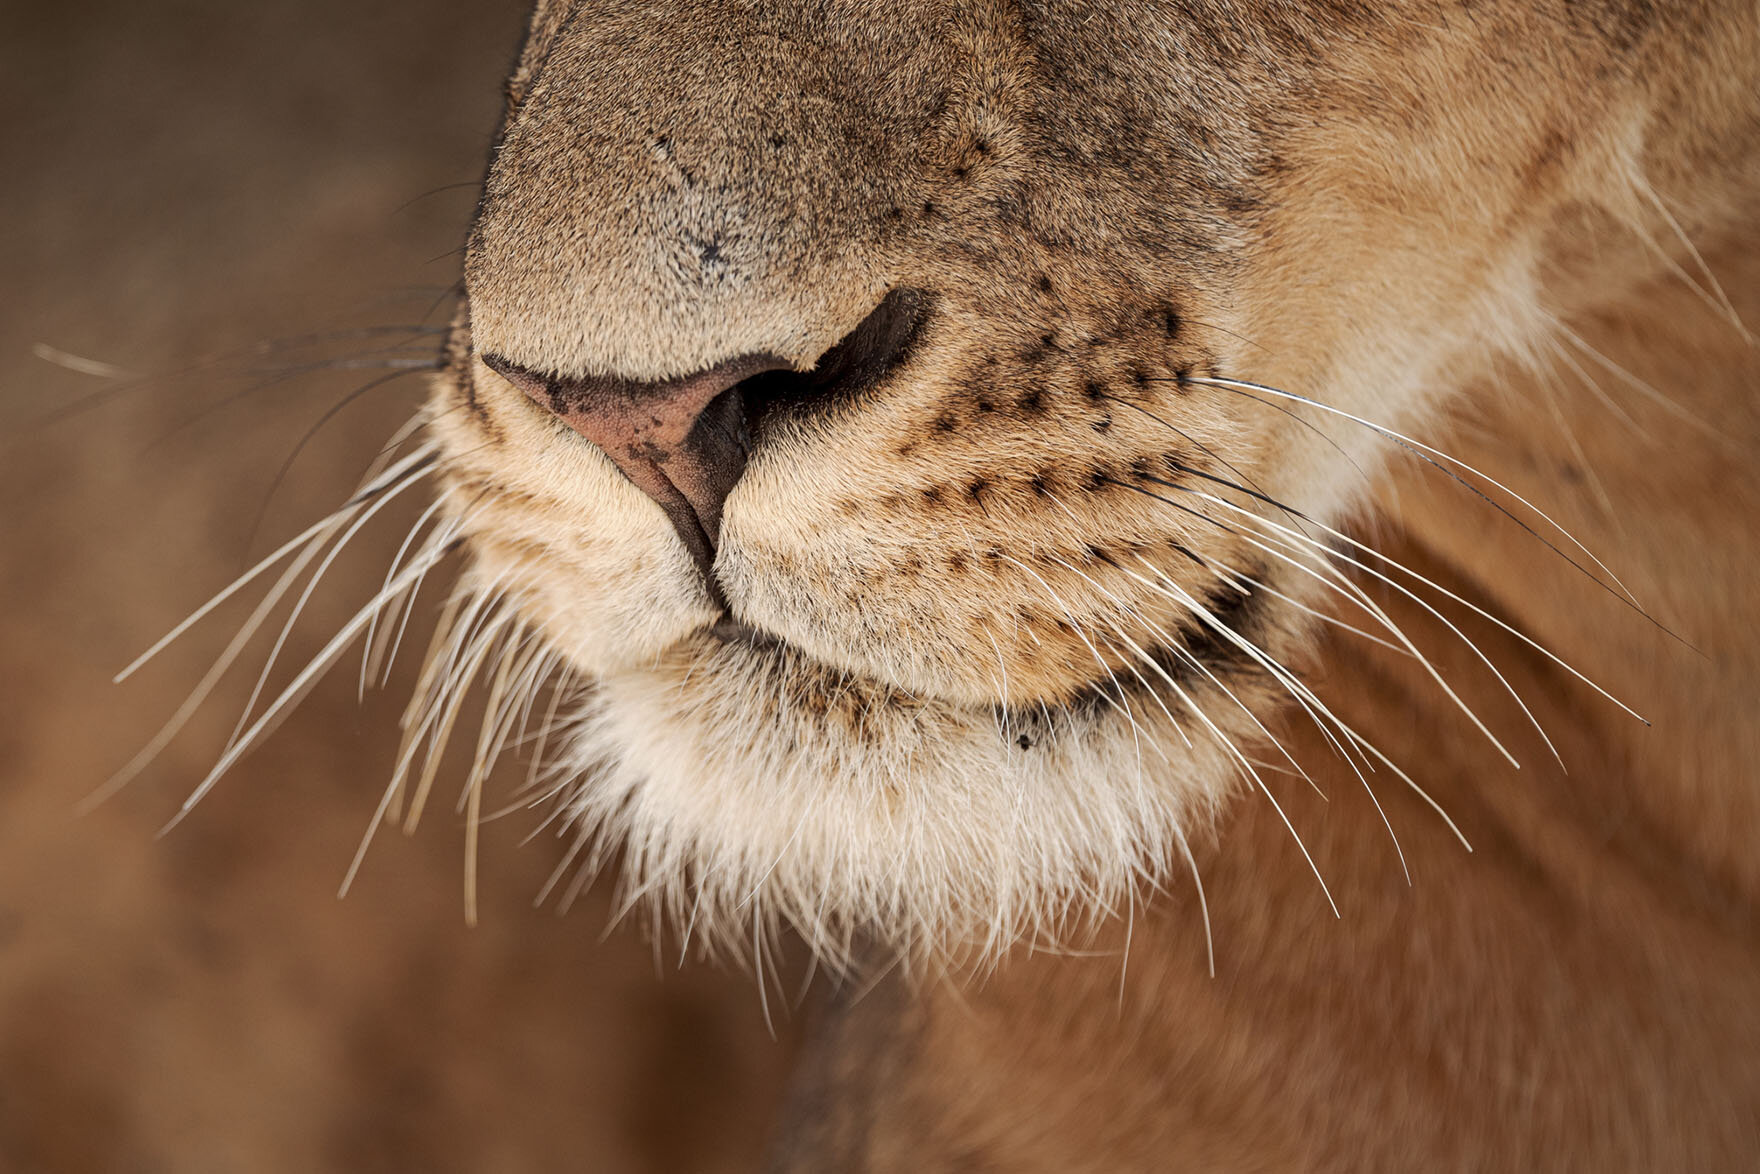 An extreme close up of a lioness' mouth